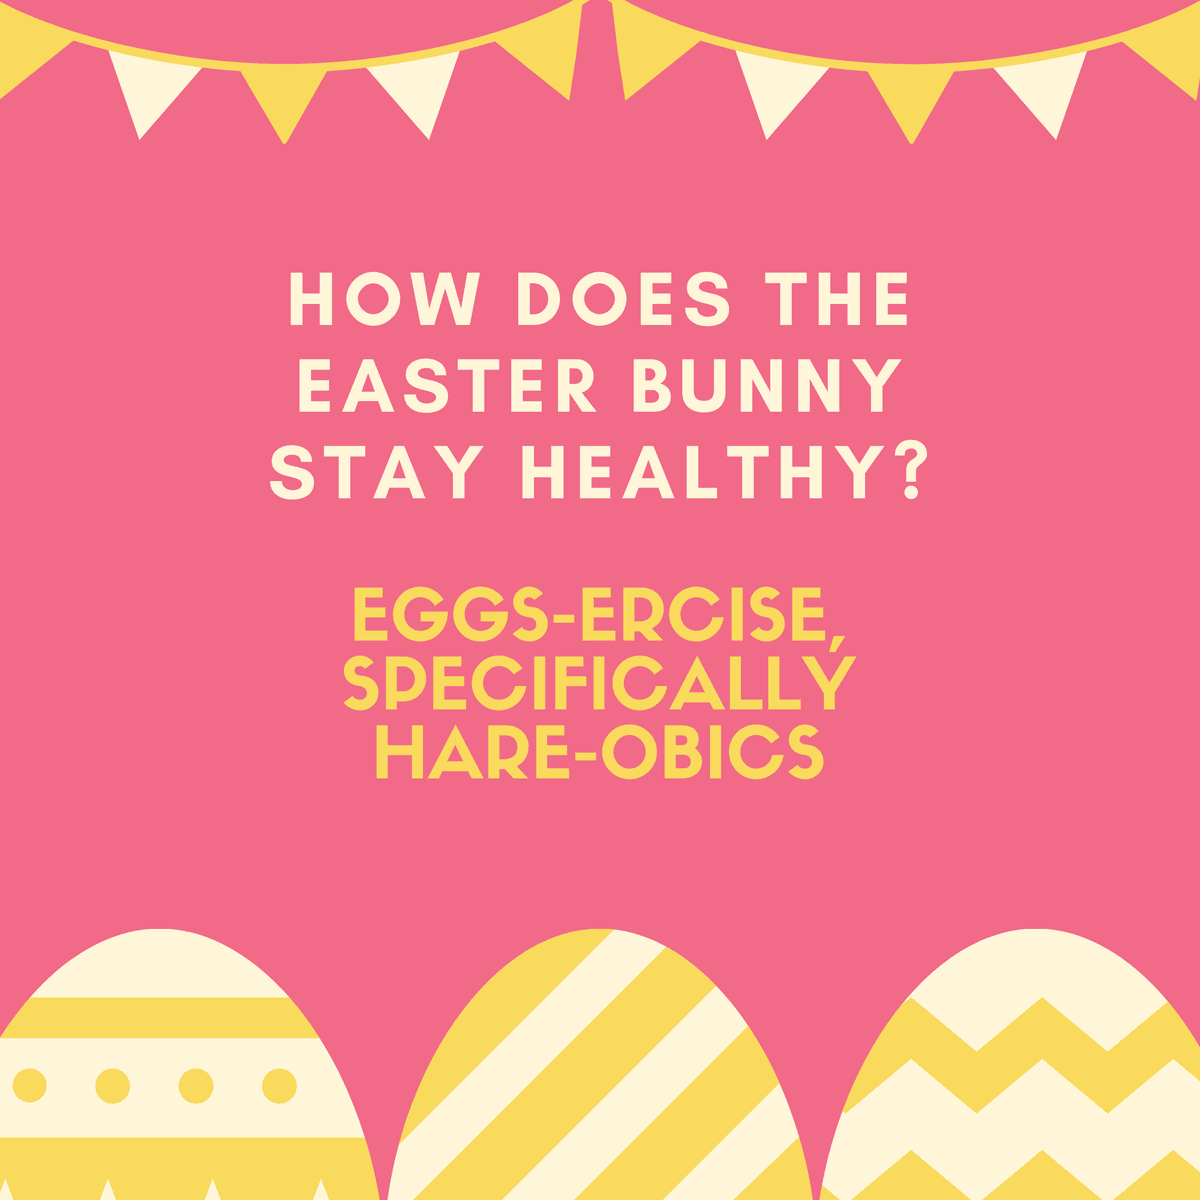 How does the Easter Bunny stay healthy? Eggs-ercise, specifically hare-obics